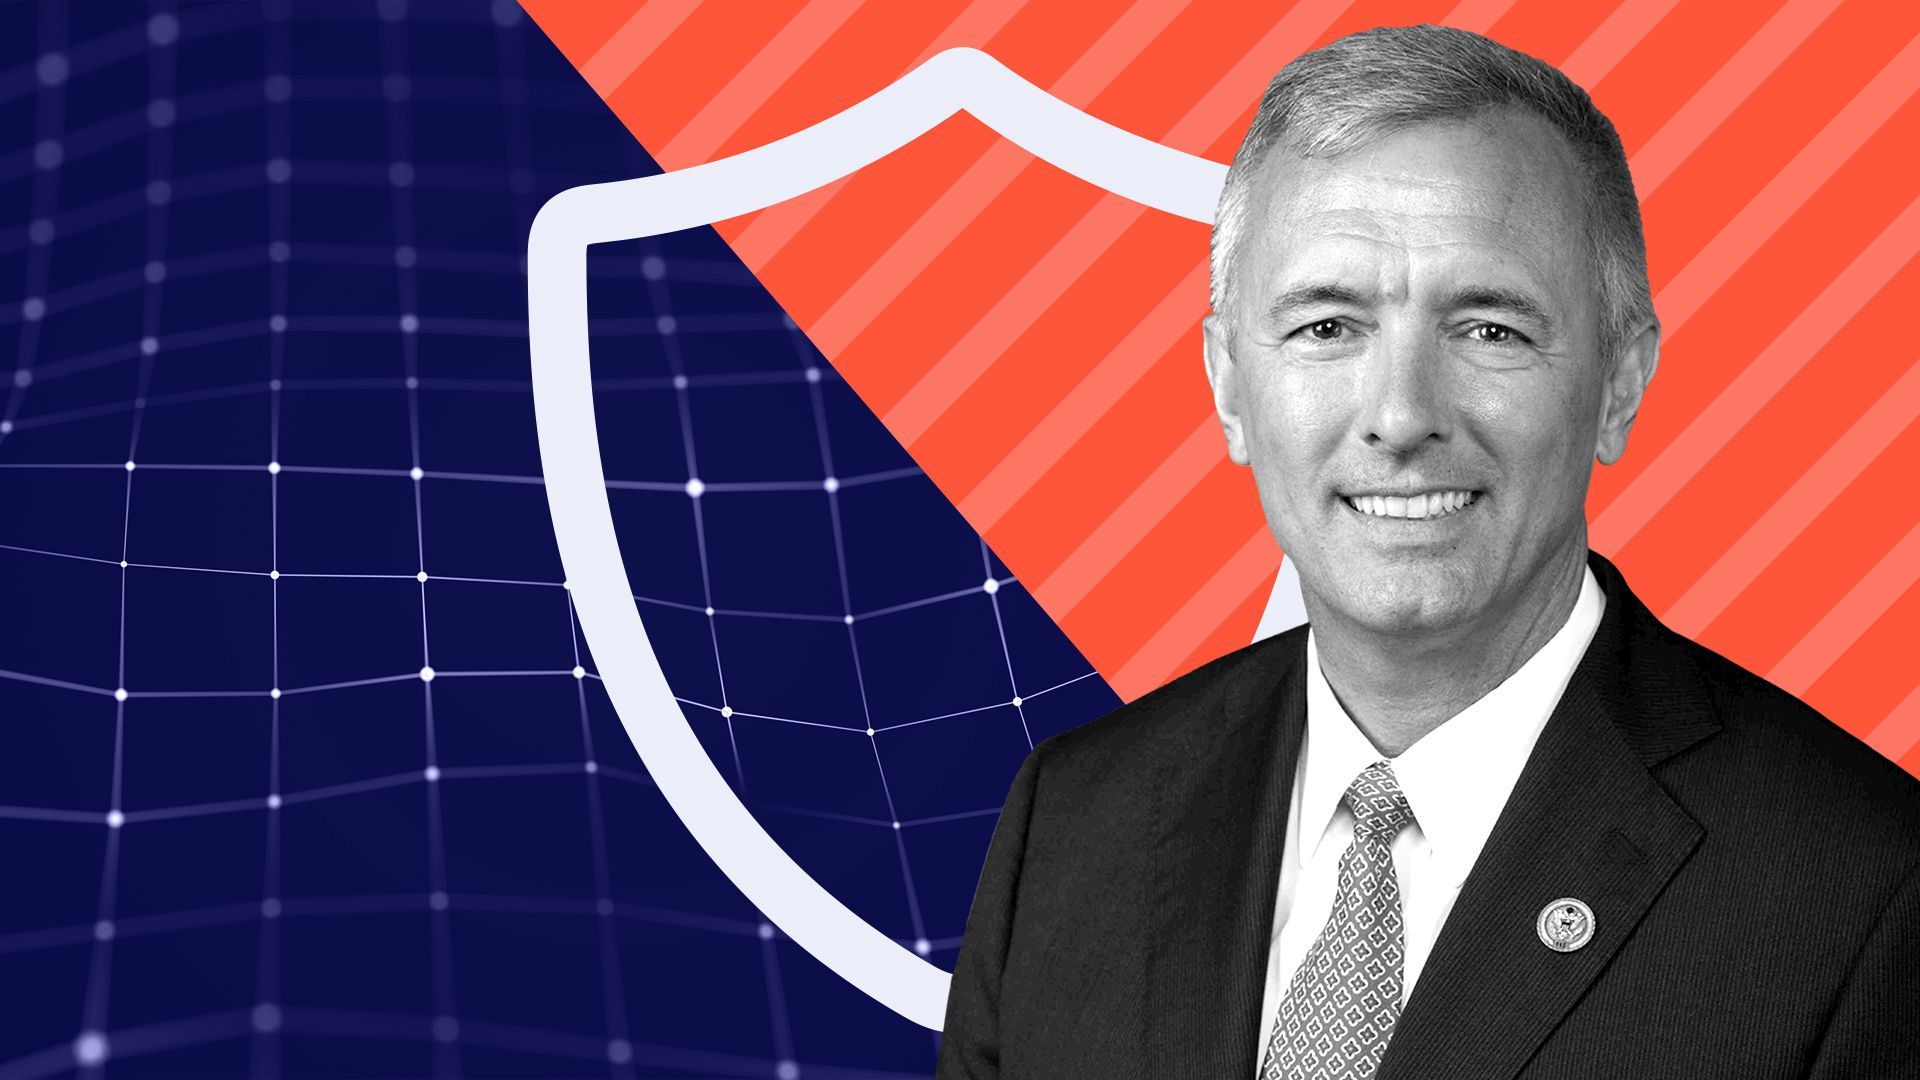 Photo illustration of Rep. John Katko with a shield and abstract background imagery.